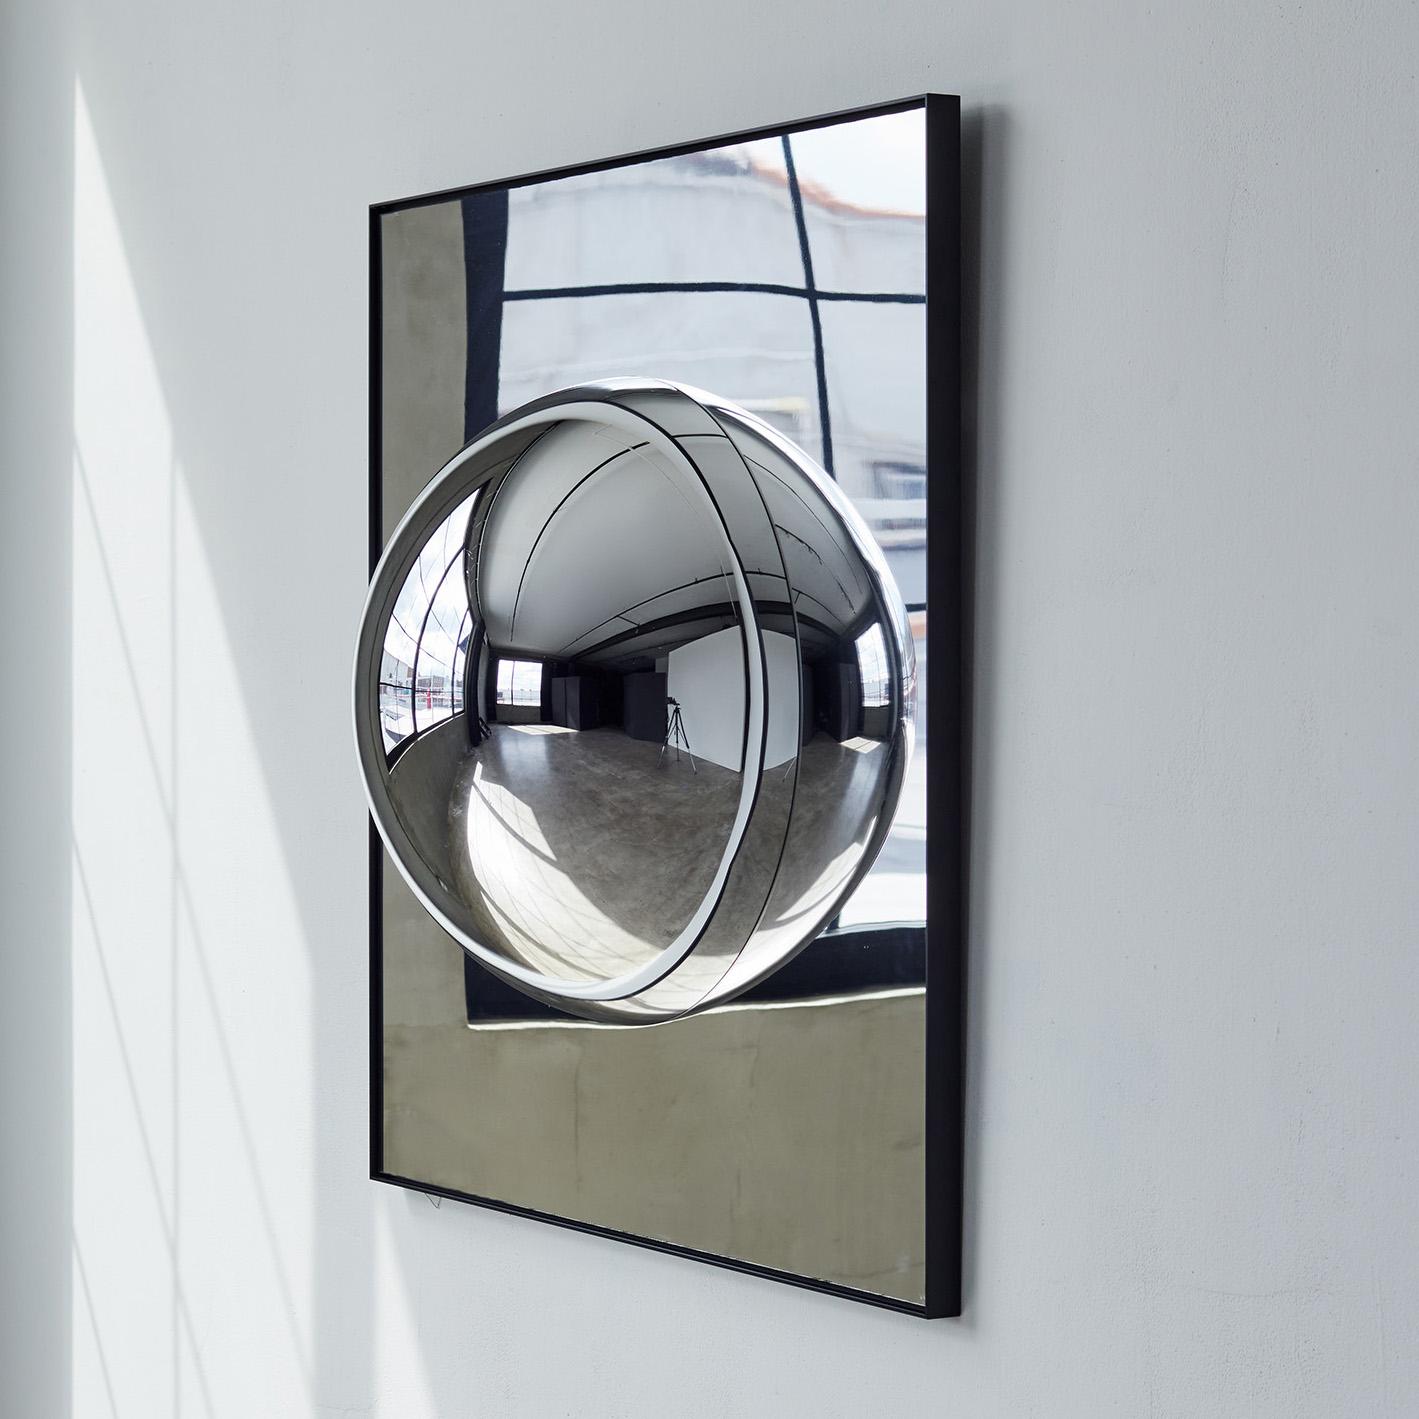 As seen in: Interior Design Magazine, Sight Unseen, Hypebeast

VIEW Orb Wall Mirror is part of a five-piece collection of sculptural glass and mirror furniture seeking to bring interactive views into objects and furniture. 

The collection